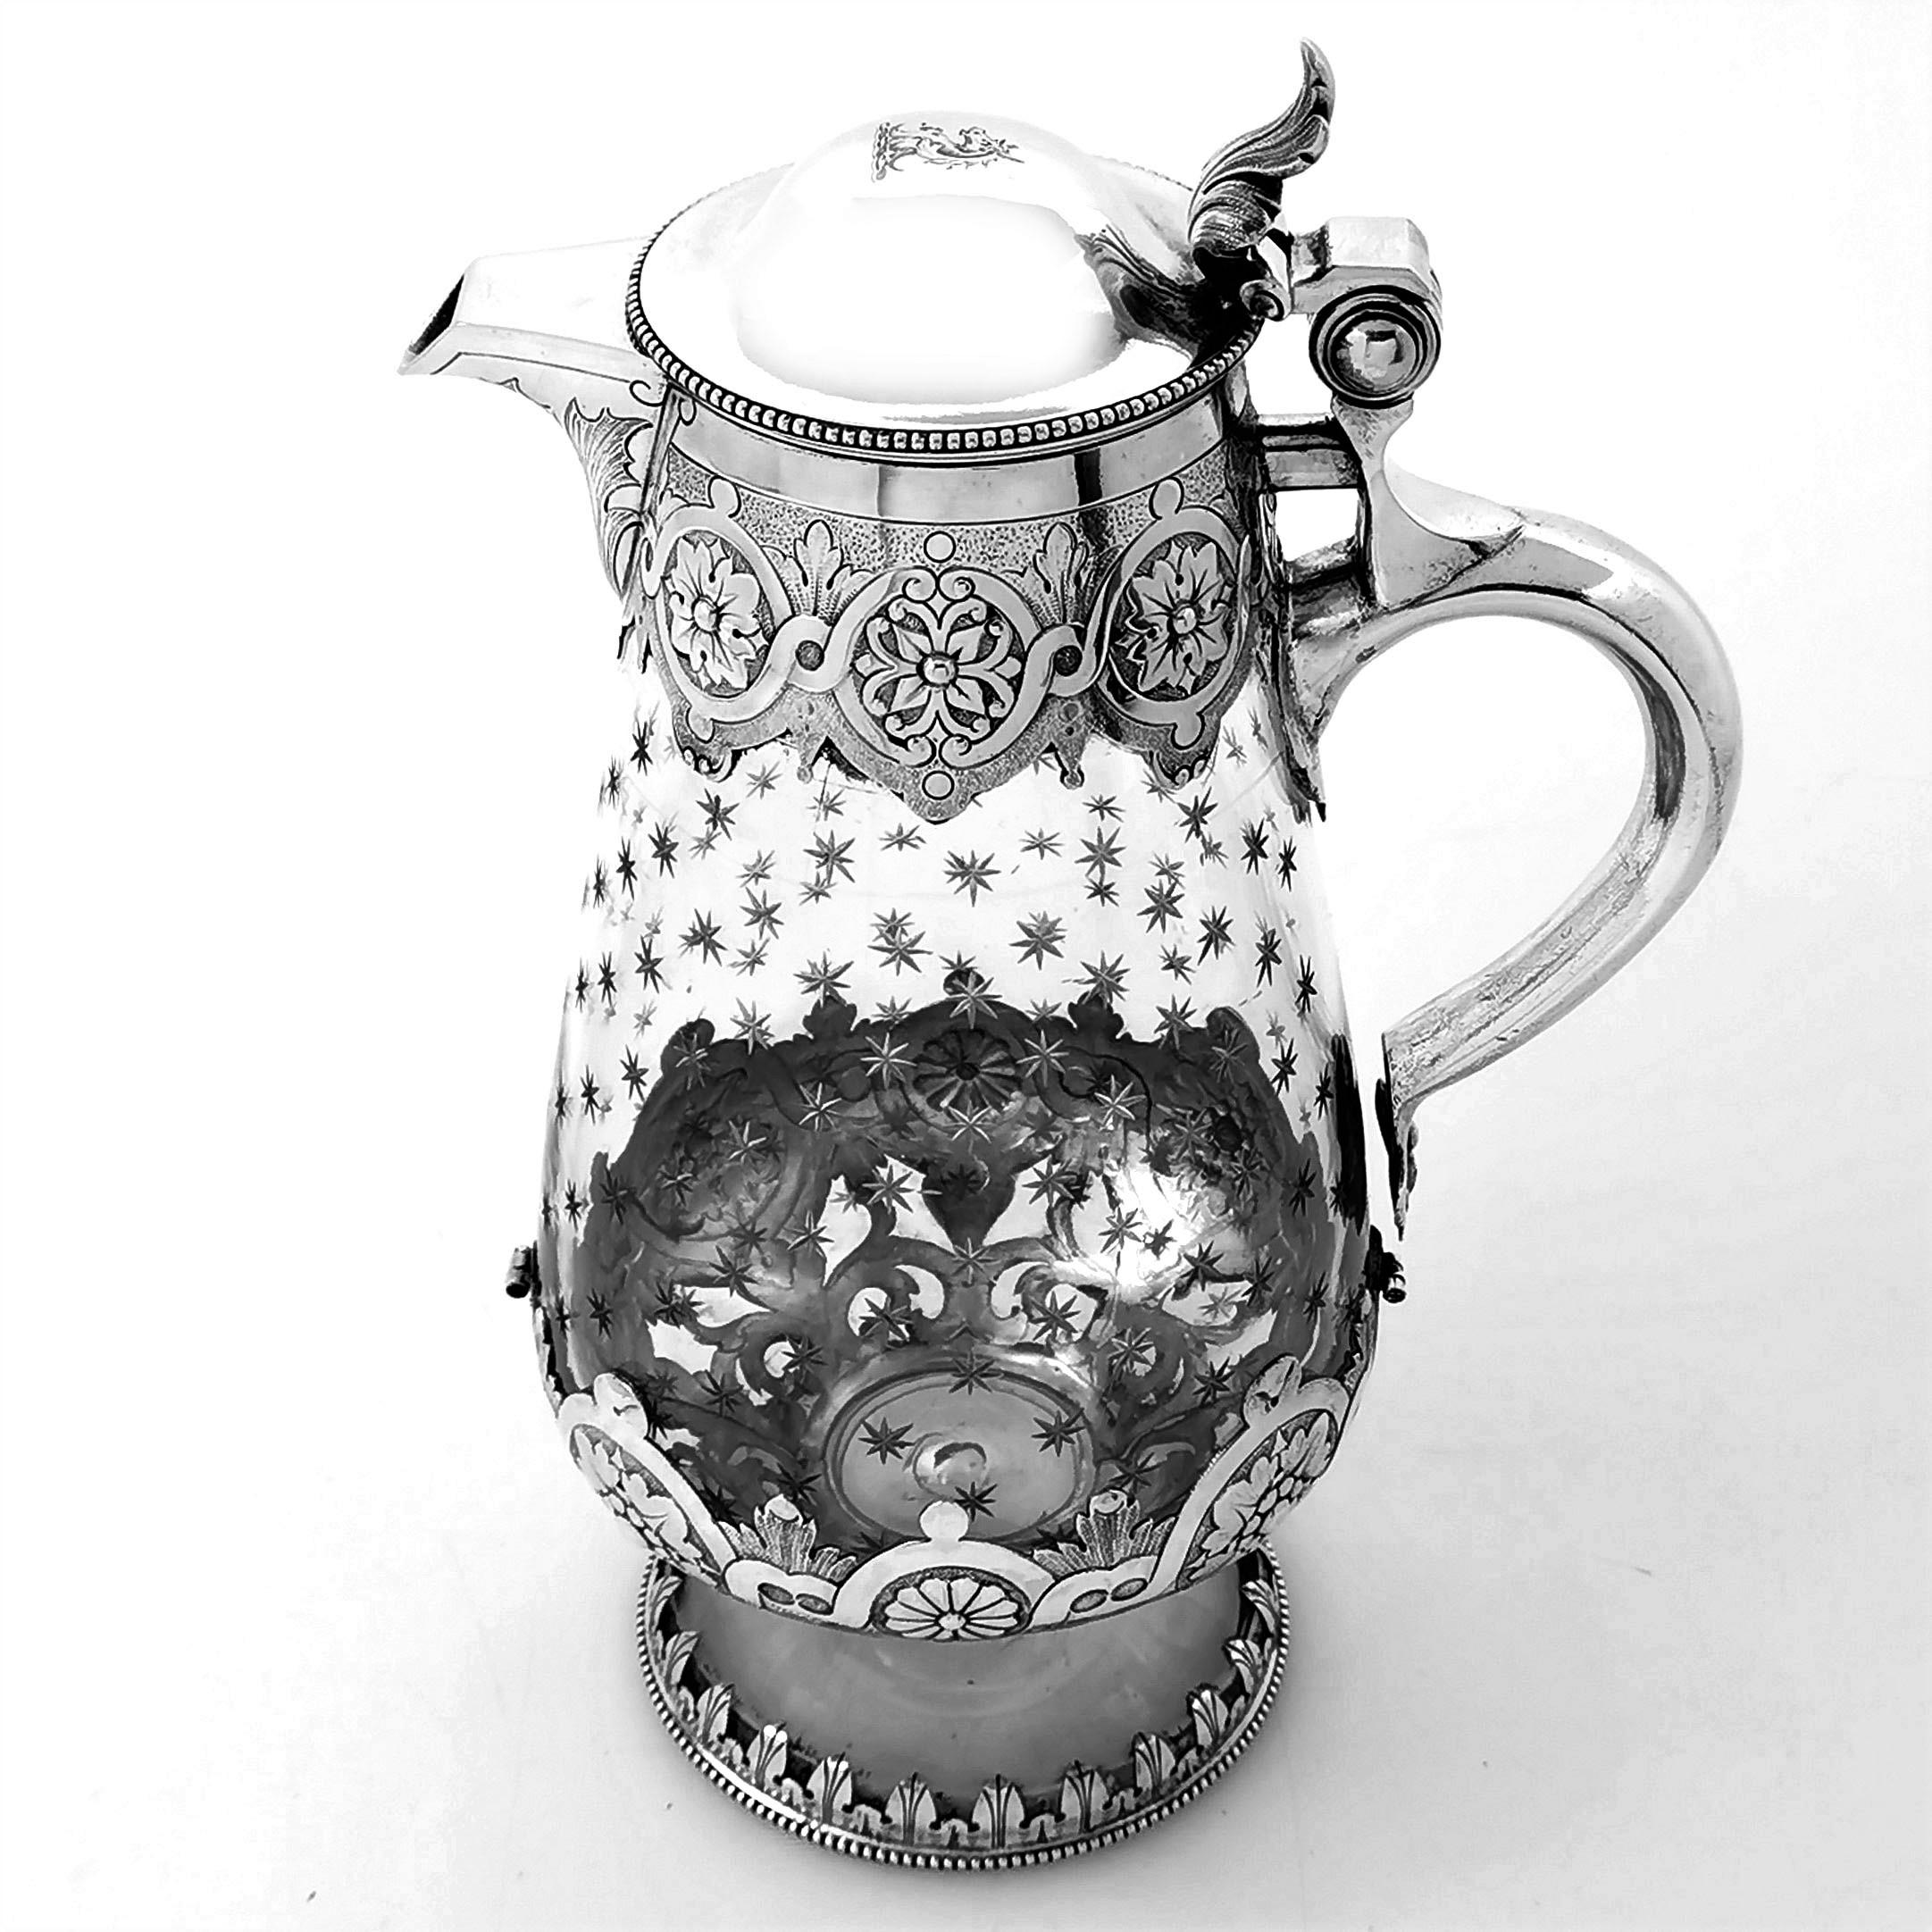 English Antique Victorian Sterling Silver and Cut Glass Claret Jug / Wine Decanter, 1881